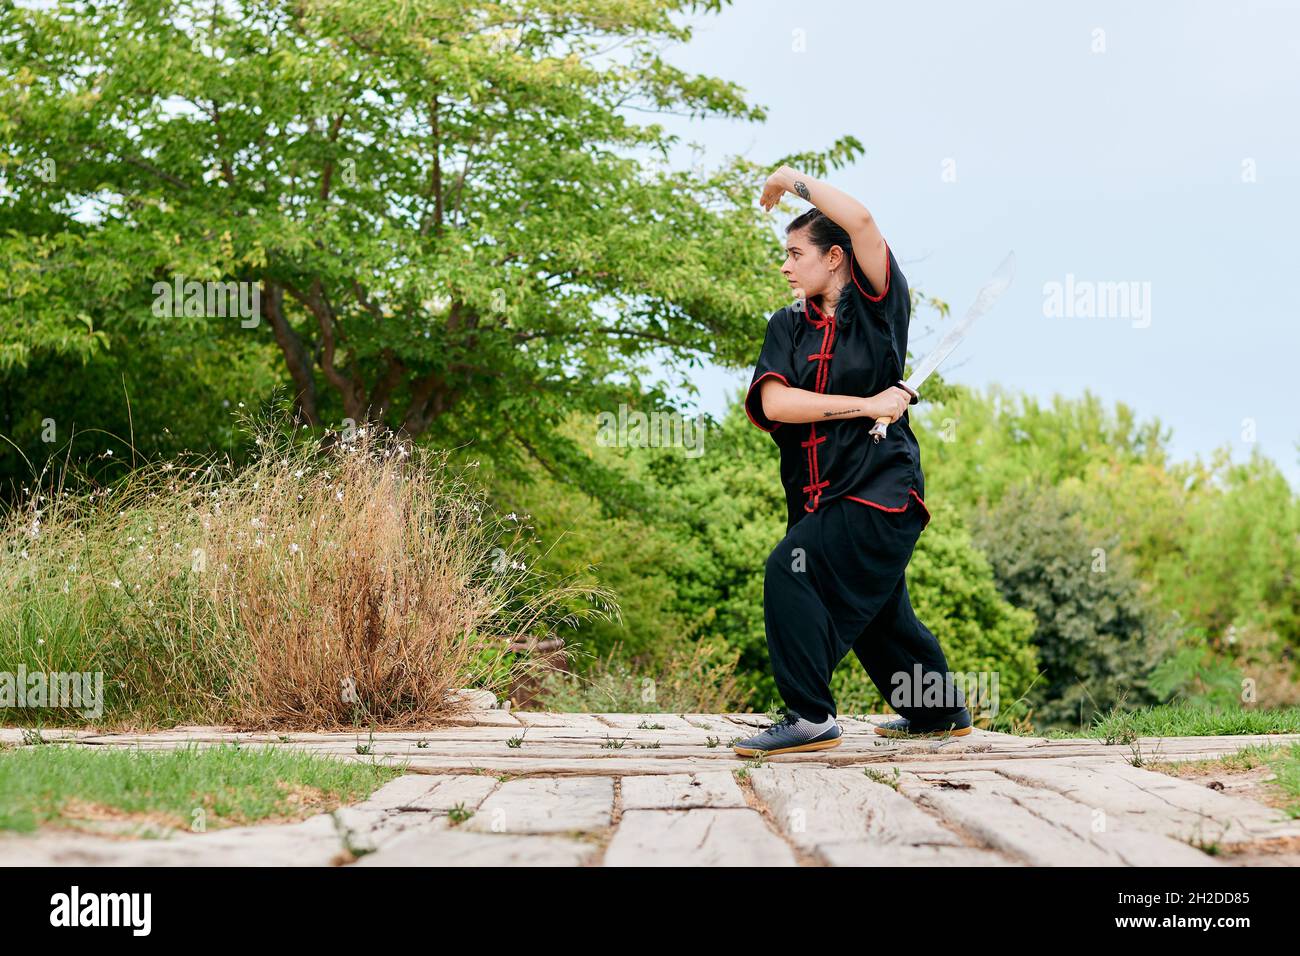 Woman training kung fu with a sword in a park Stock Photo